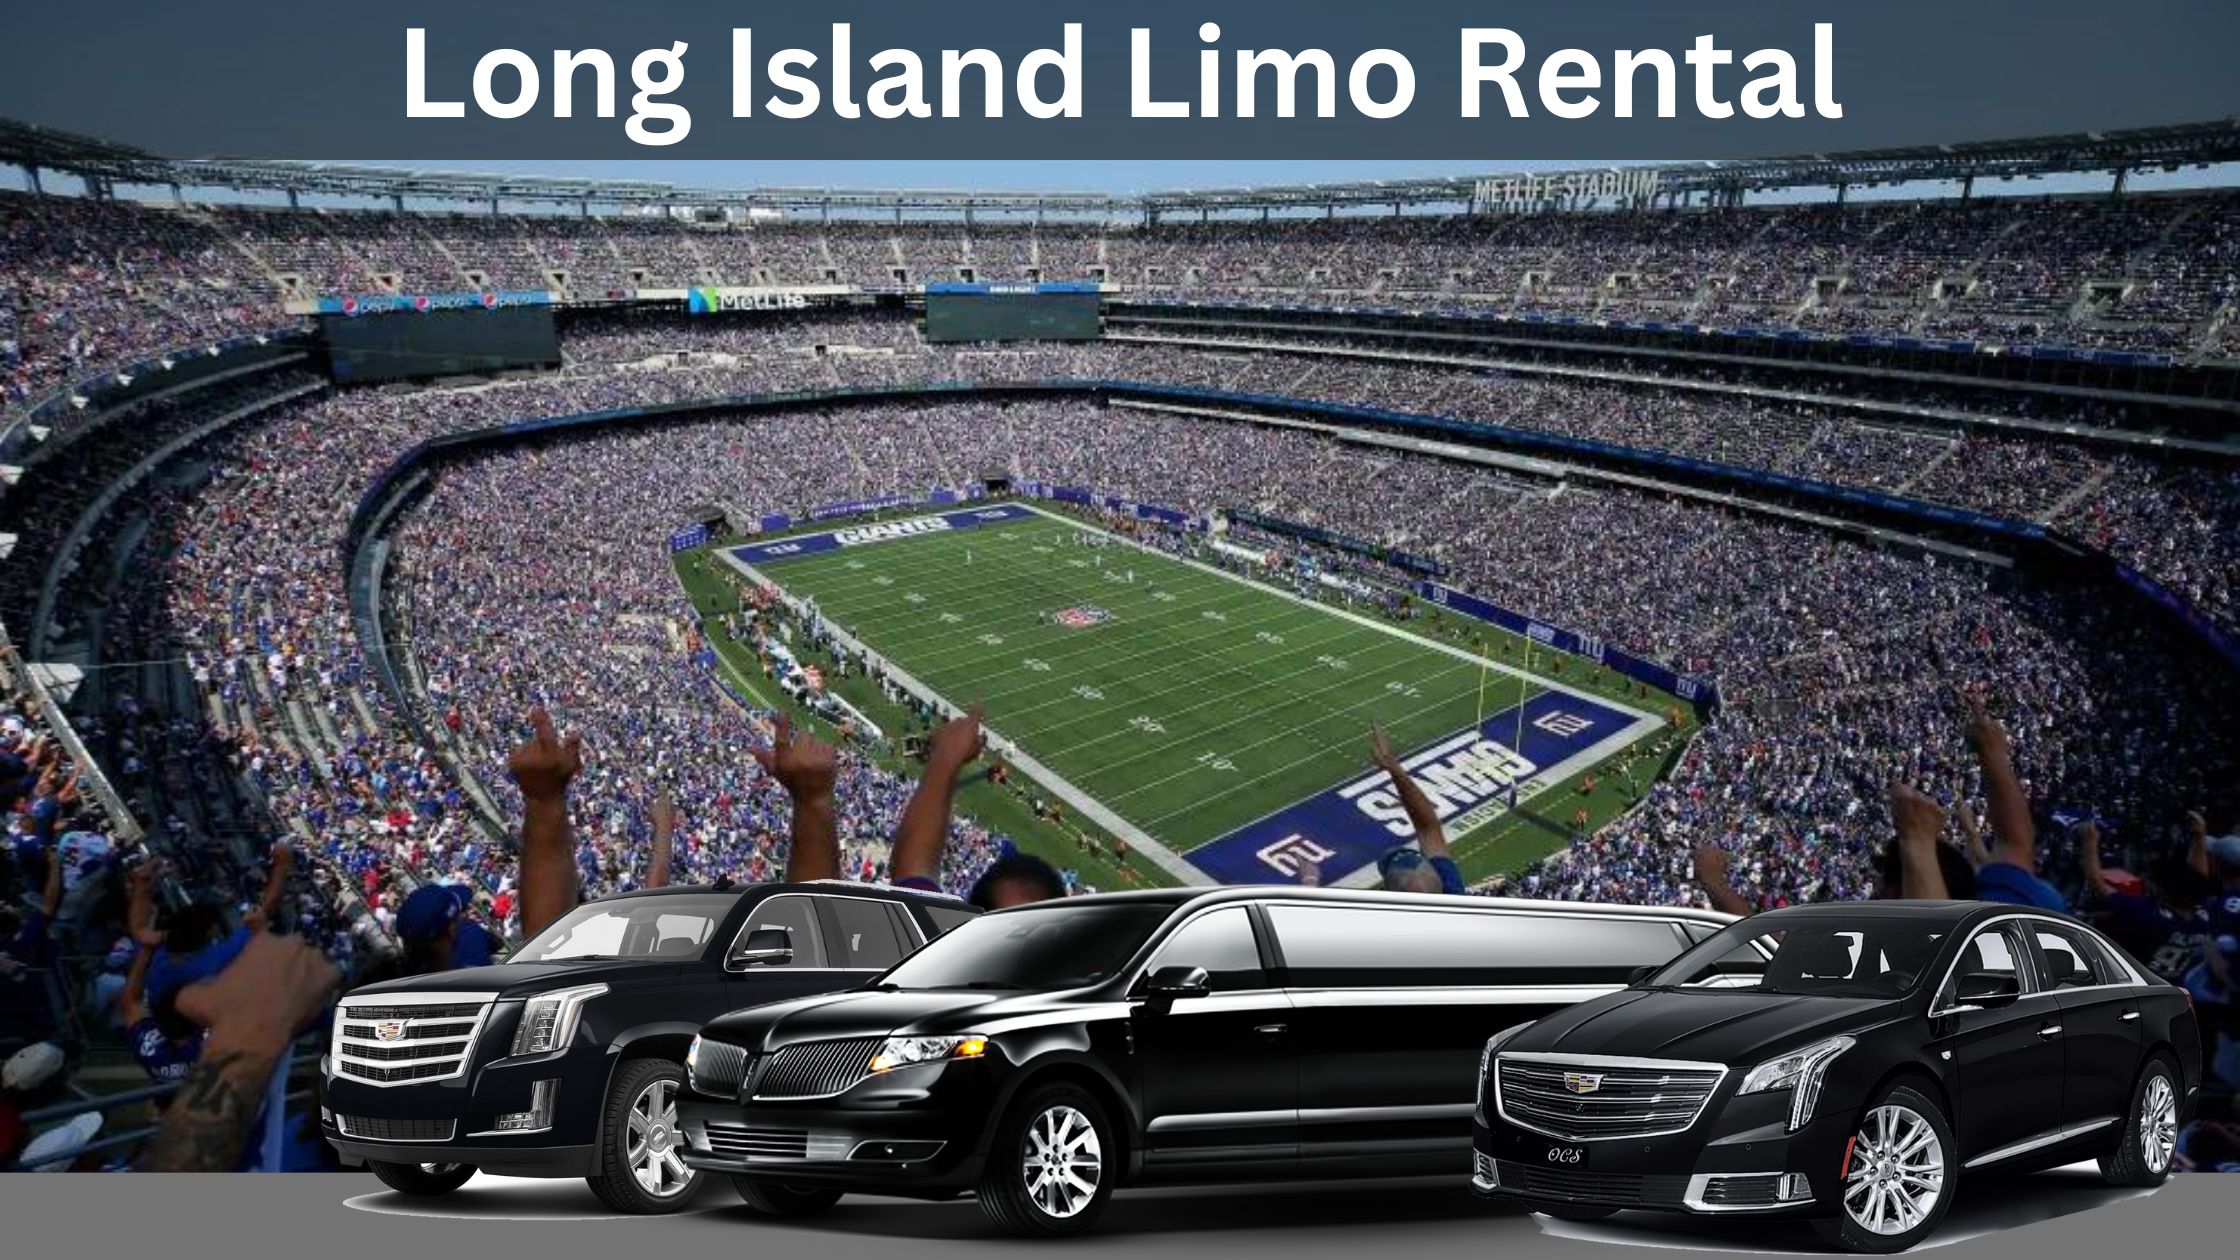 Party Bus to MetLife Stadium: Unmatched Comfort and Style with Long Island Limo Rental